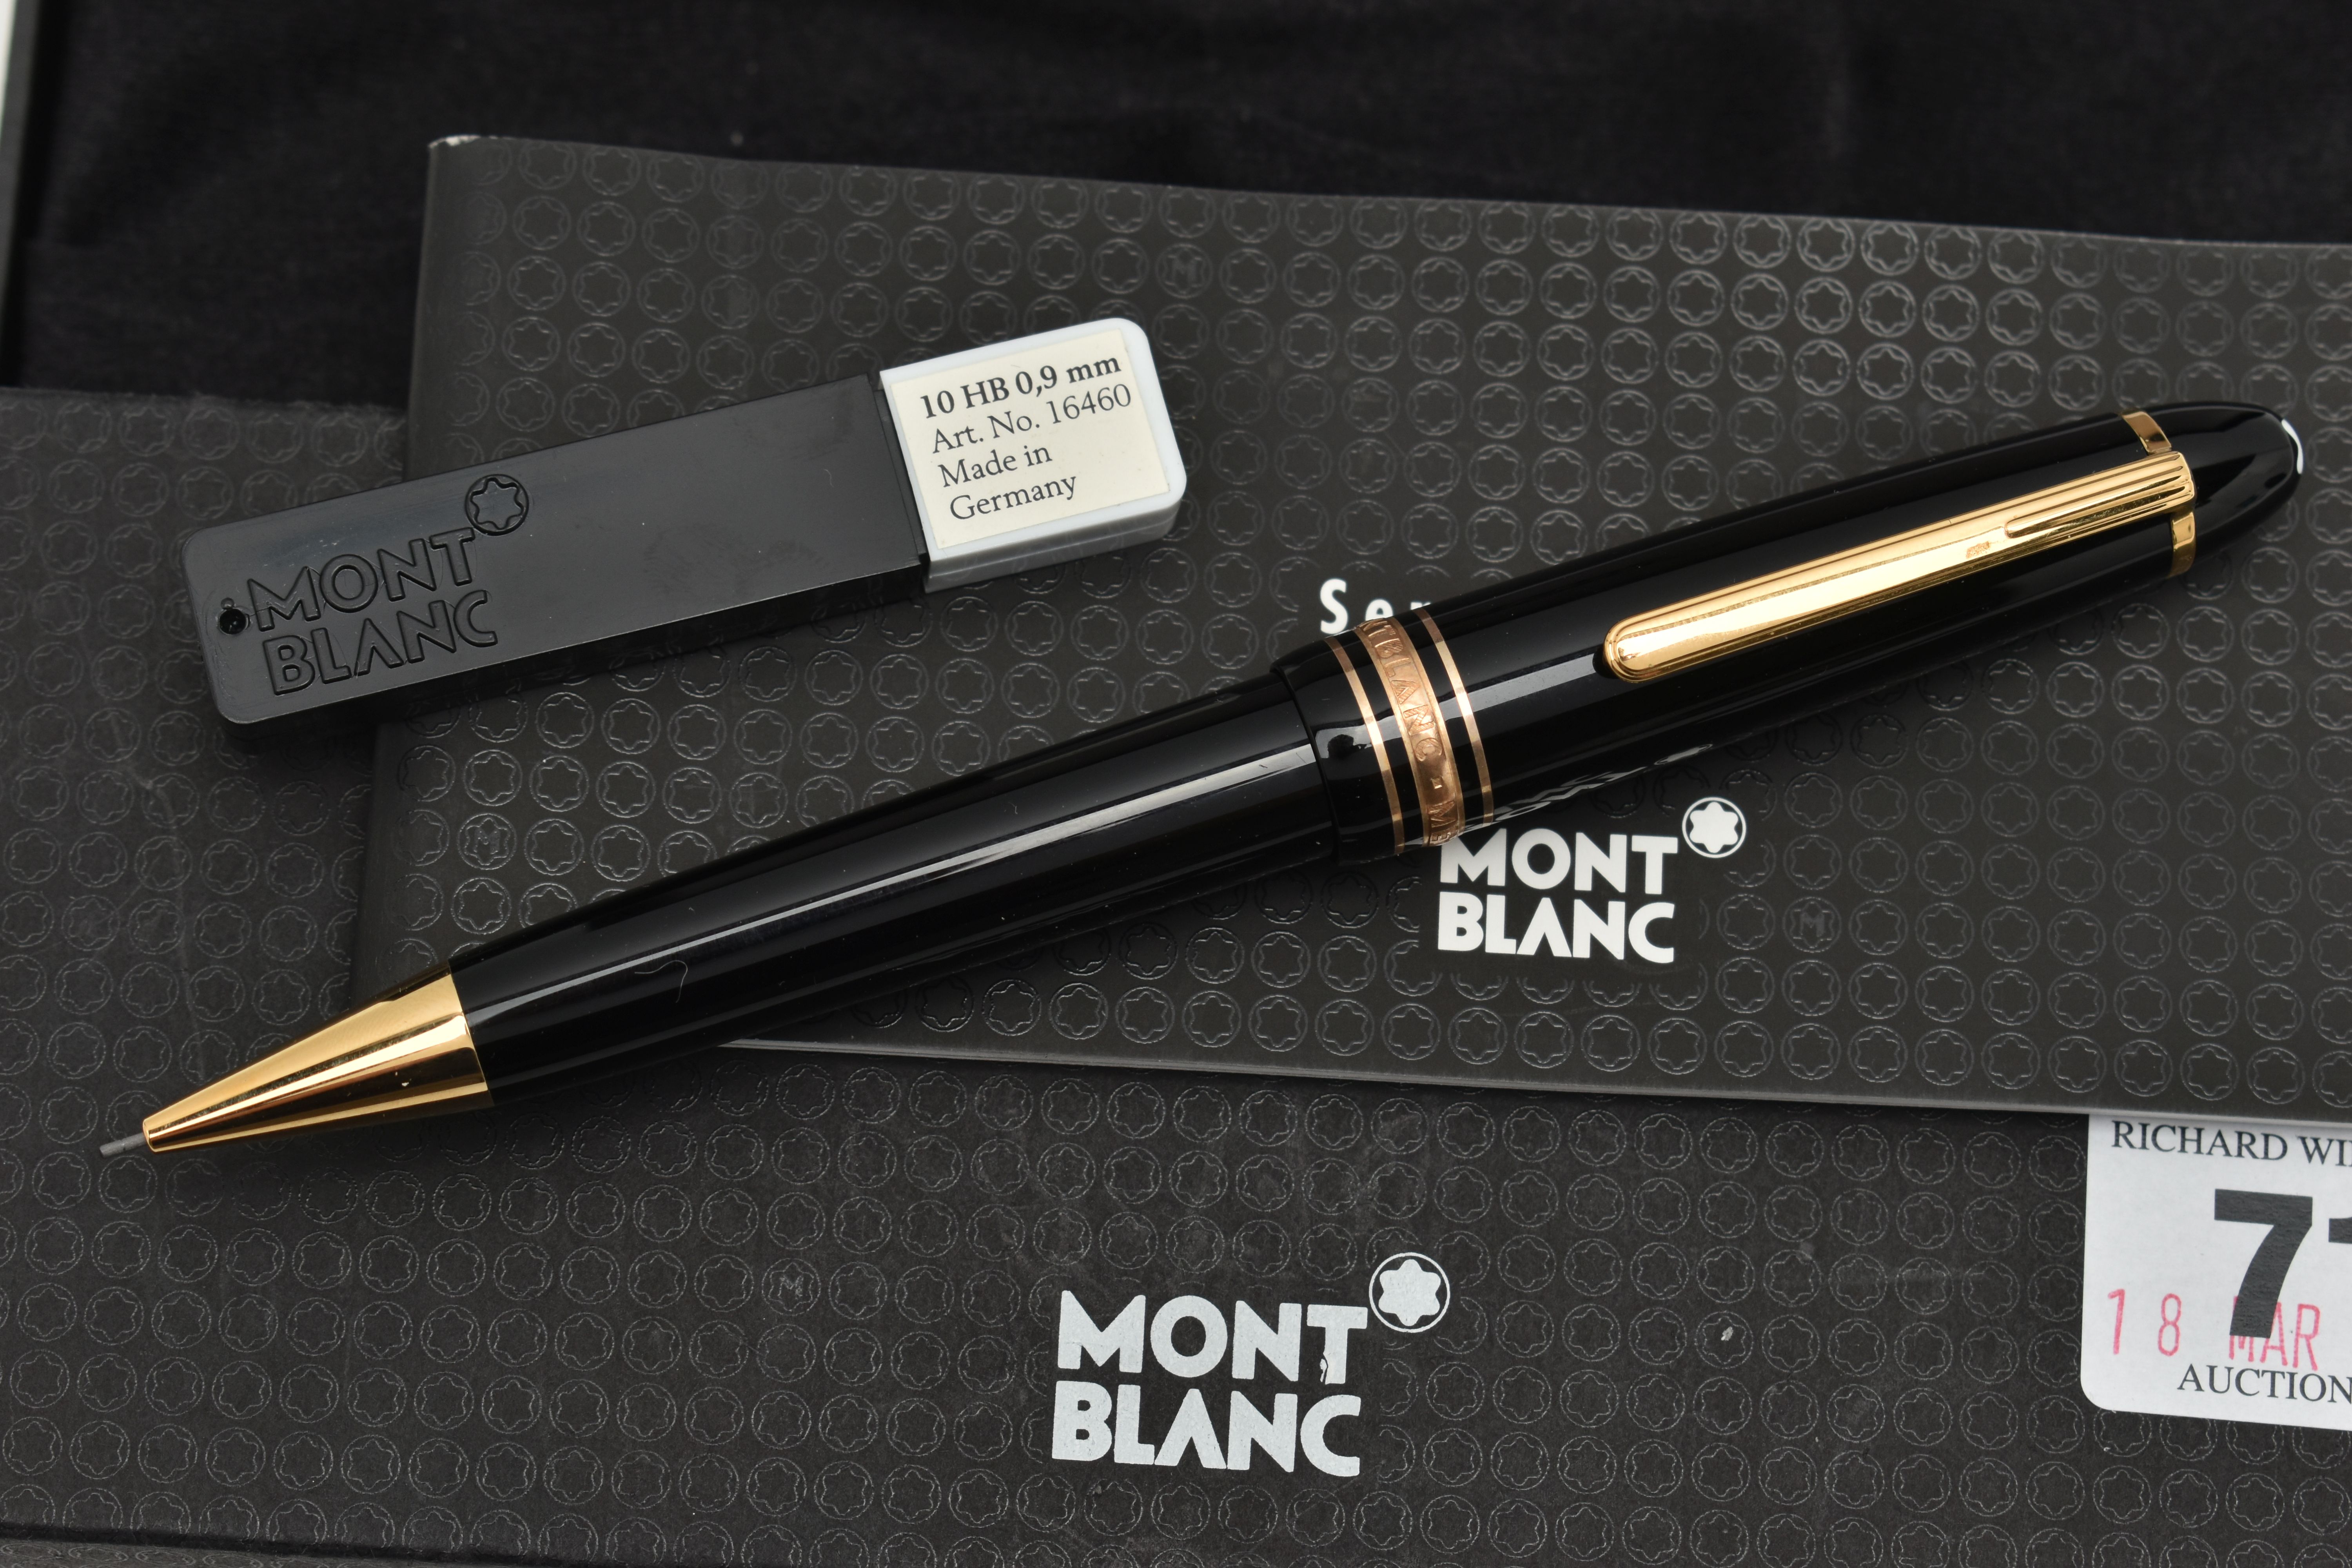 A CASED MONT BLANC MEISTERSTUCK RETRACTABLE PENCIL, the black pen case with gold coloured trim, - Image 2 of 4